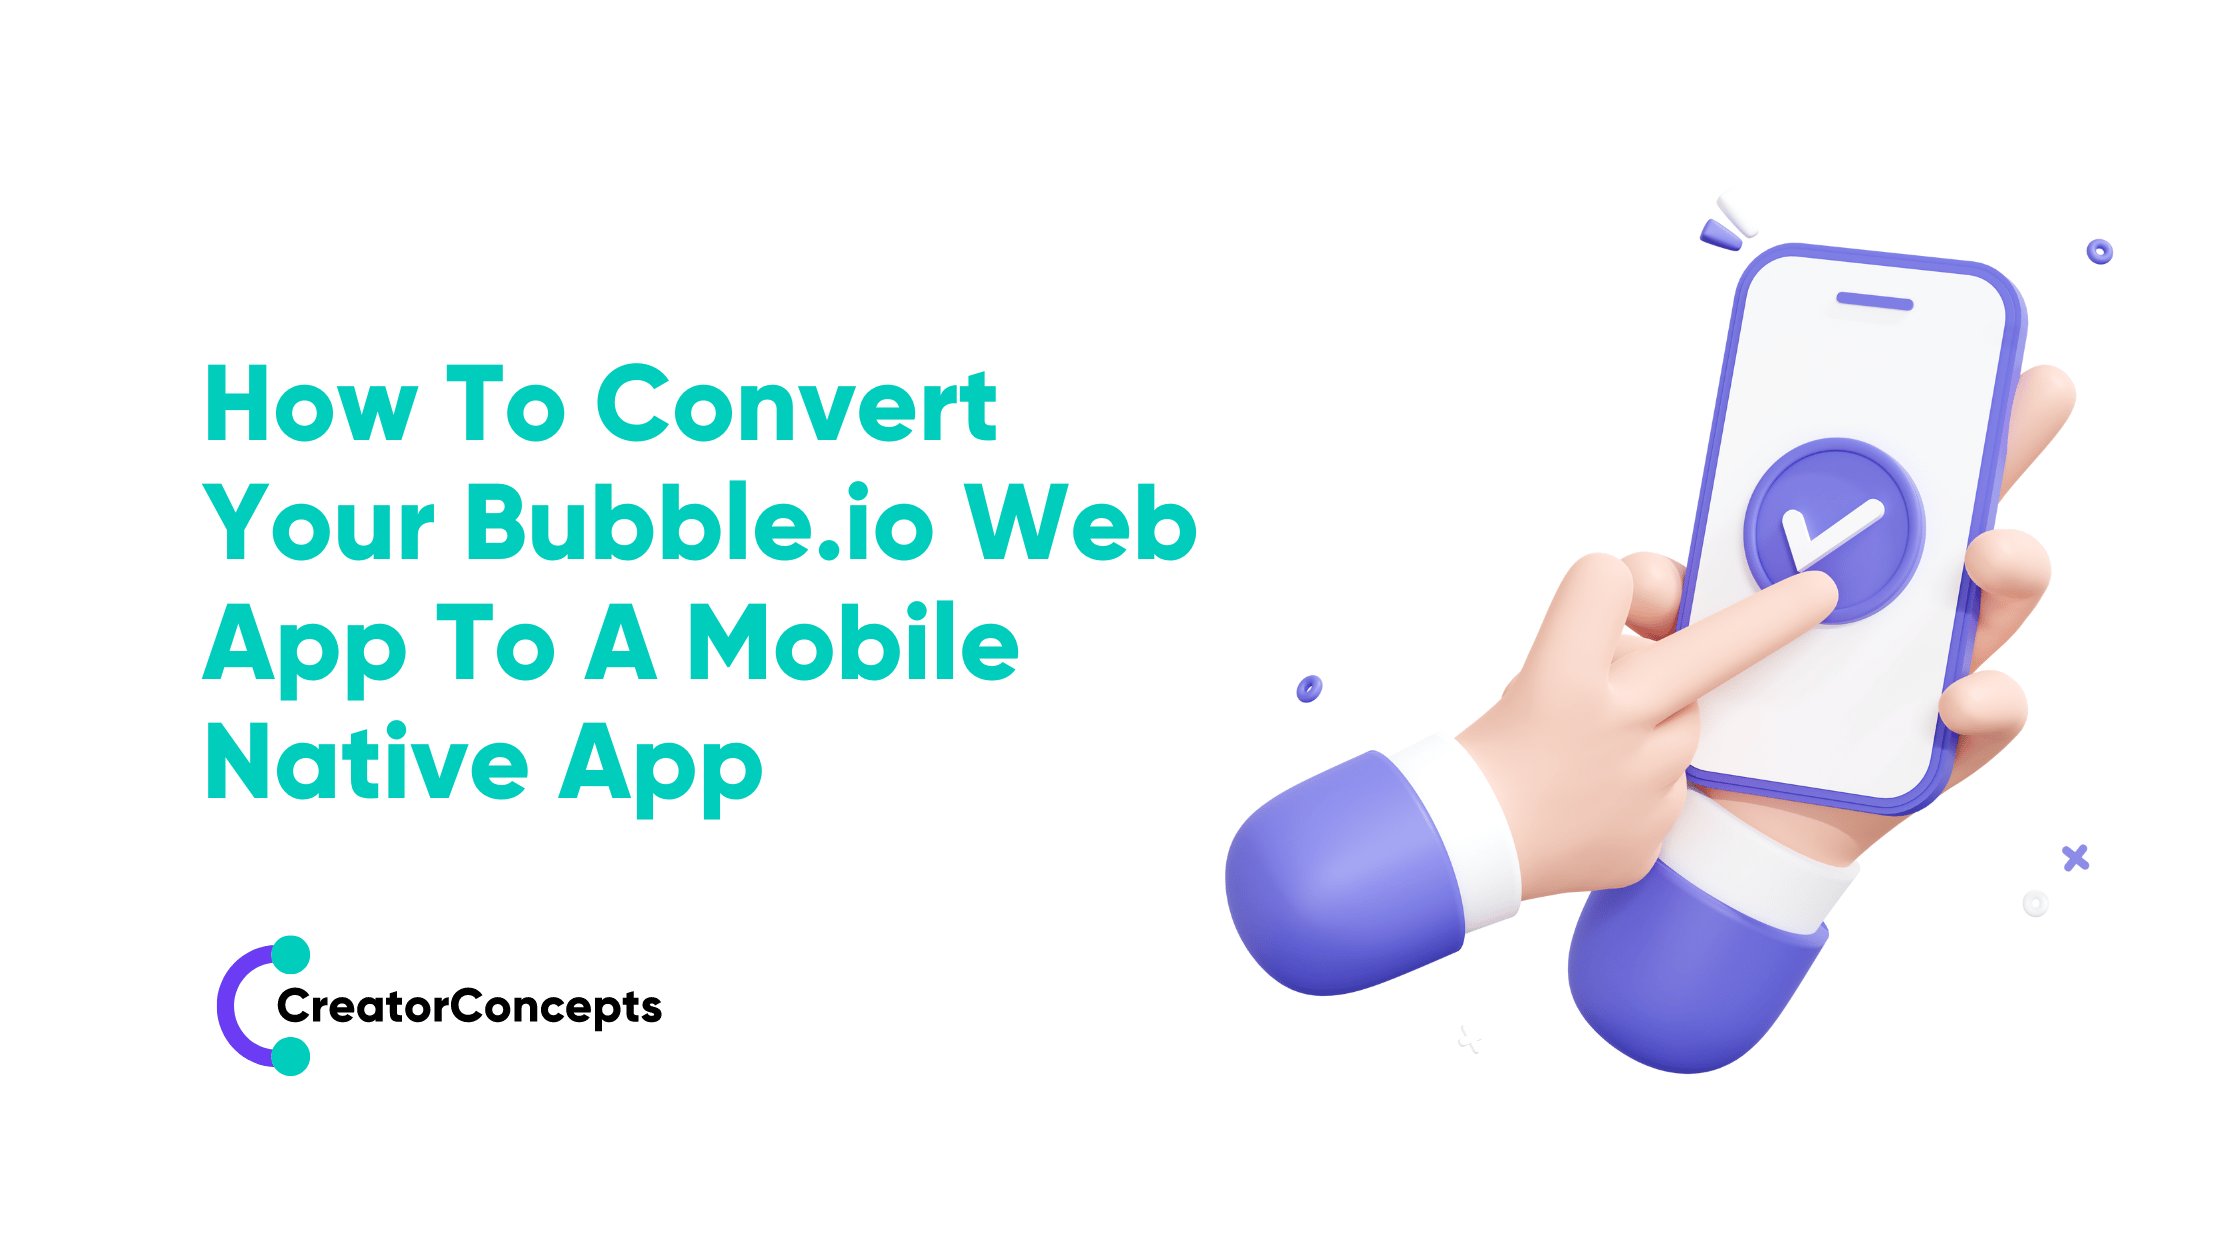 Learn how to convert your Bubble.io web app into a mobile native app with ease.